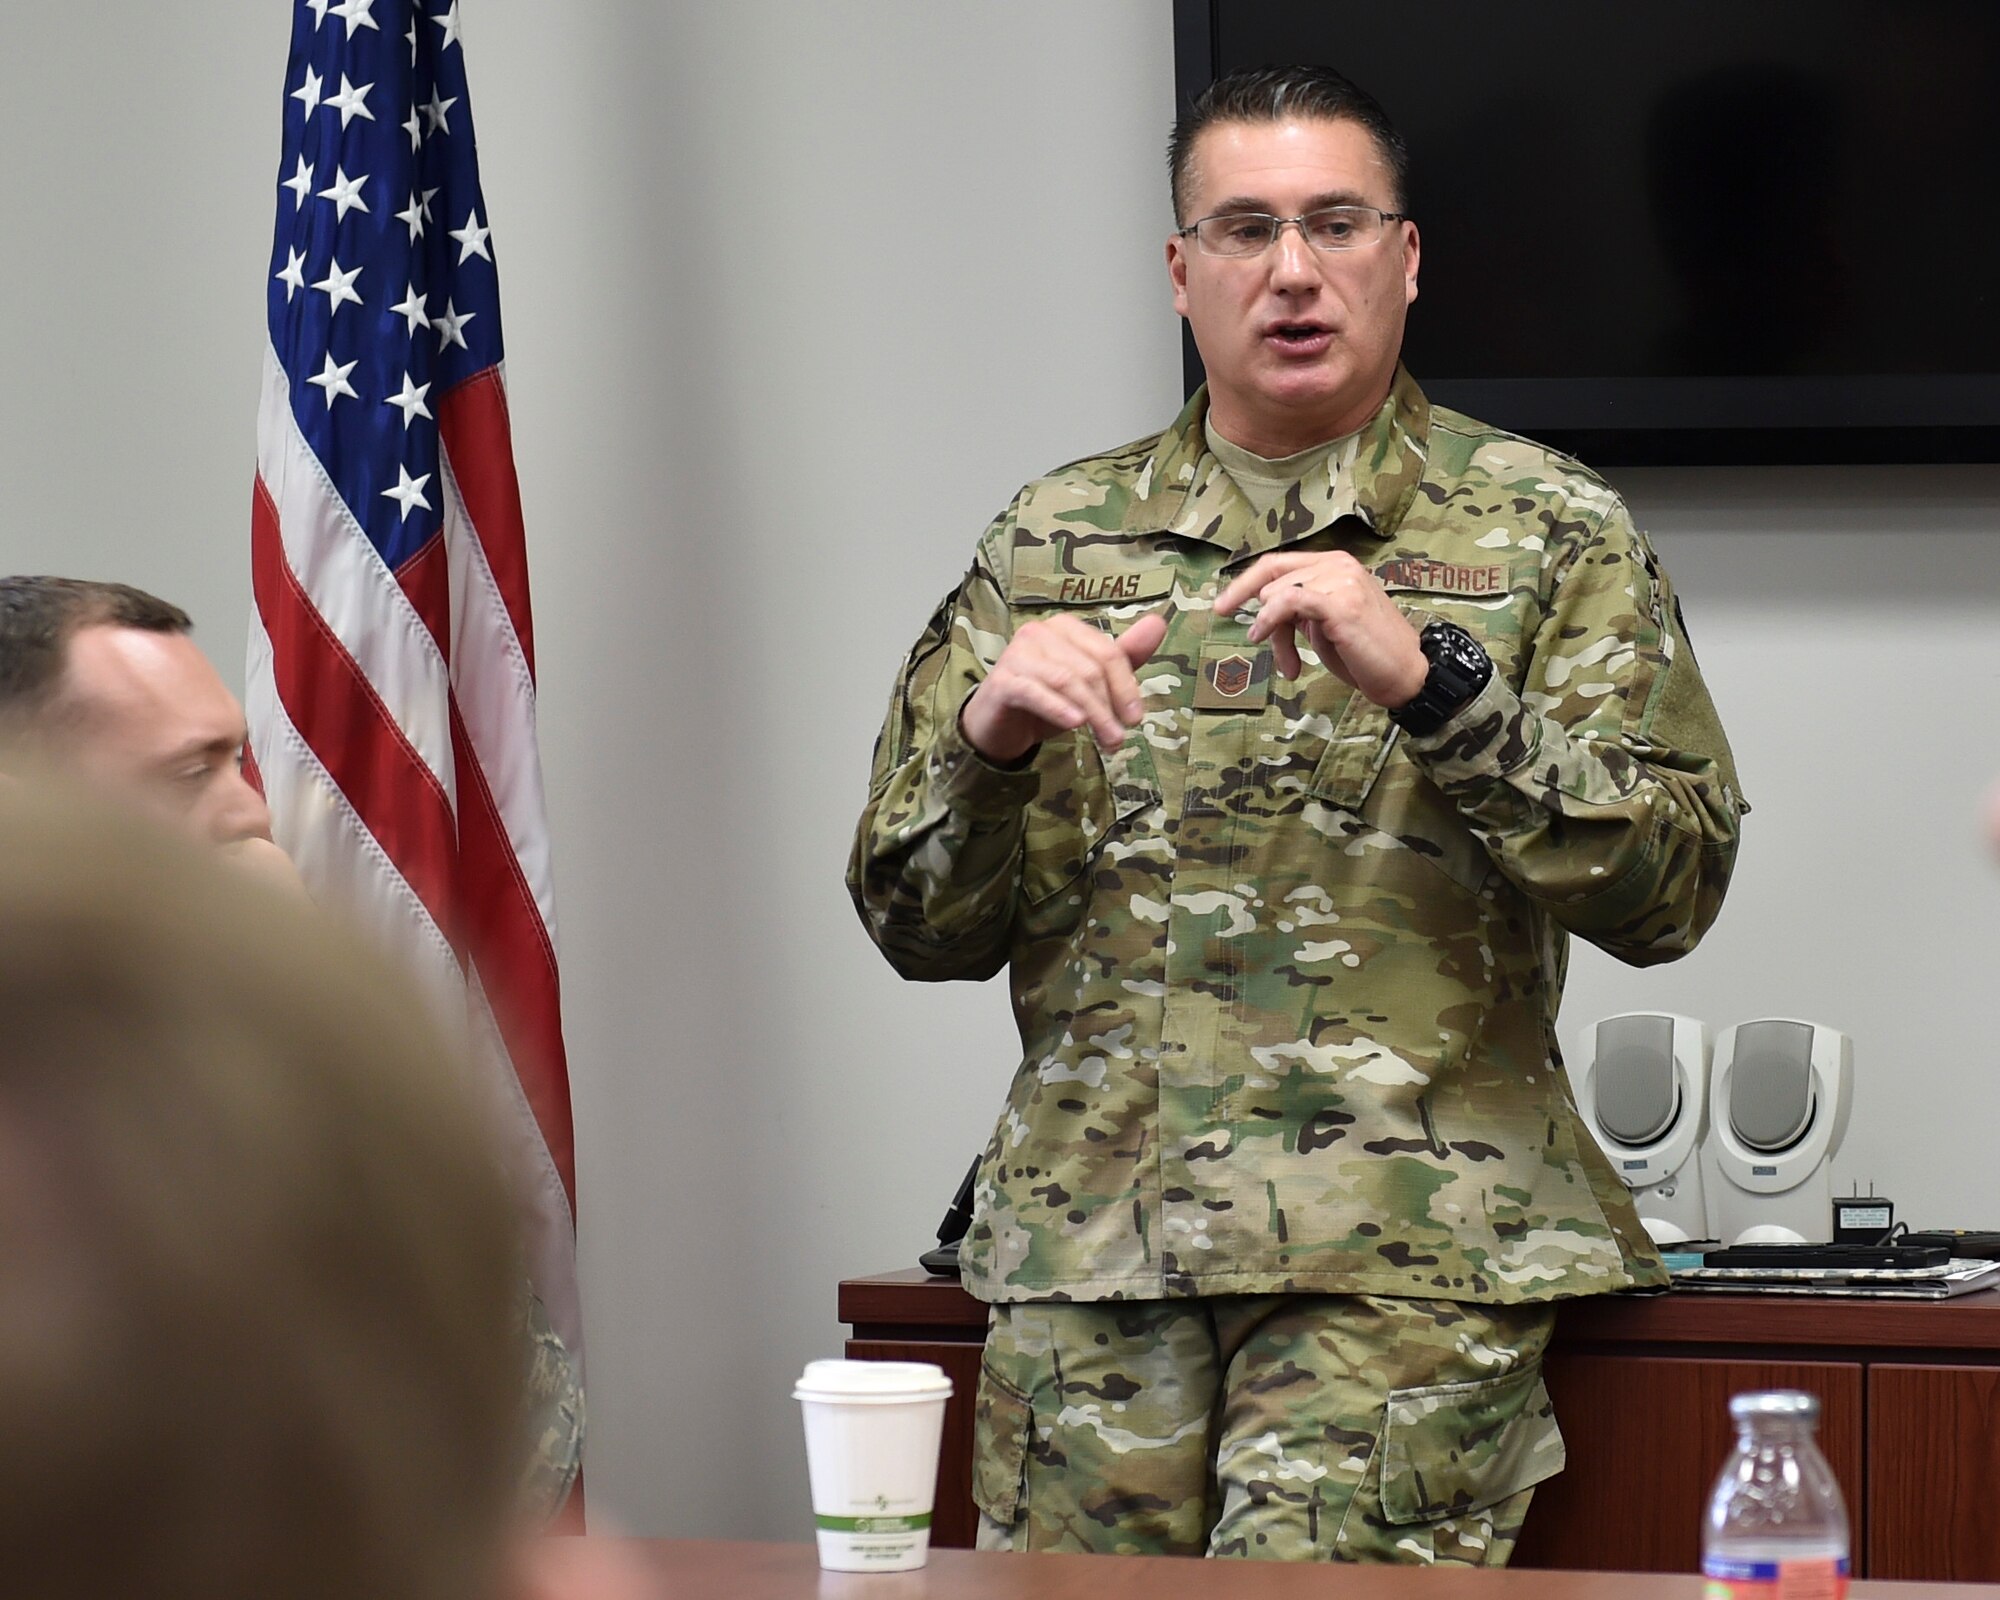 Chief Master Sgt. Imelda B. Johnson, the 22nd Air Force Command Chief Master Sergeant, visited Youngstown Air Reserve Station, February 9th, 2019. During her stay, Johnson met with more than 35 Air Force Reserve non-commissioned officers.
	During the meet-and-greet, Johnson opened the floor to the Airmen so they may voice their questions, concerns and experiences within the current Air Force Reserve structure. A myriad topics were discussed: the optimization of training, commissioning opportunities, Airmen retention, ramifications of a possible government shutdown and benefits concerning retirement and higher education. Johnson said that the purpose of the event was to pass on knowledge and to get people to start thinking outside the box and sharing their expertise.